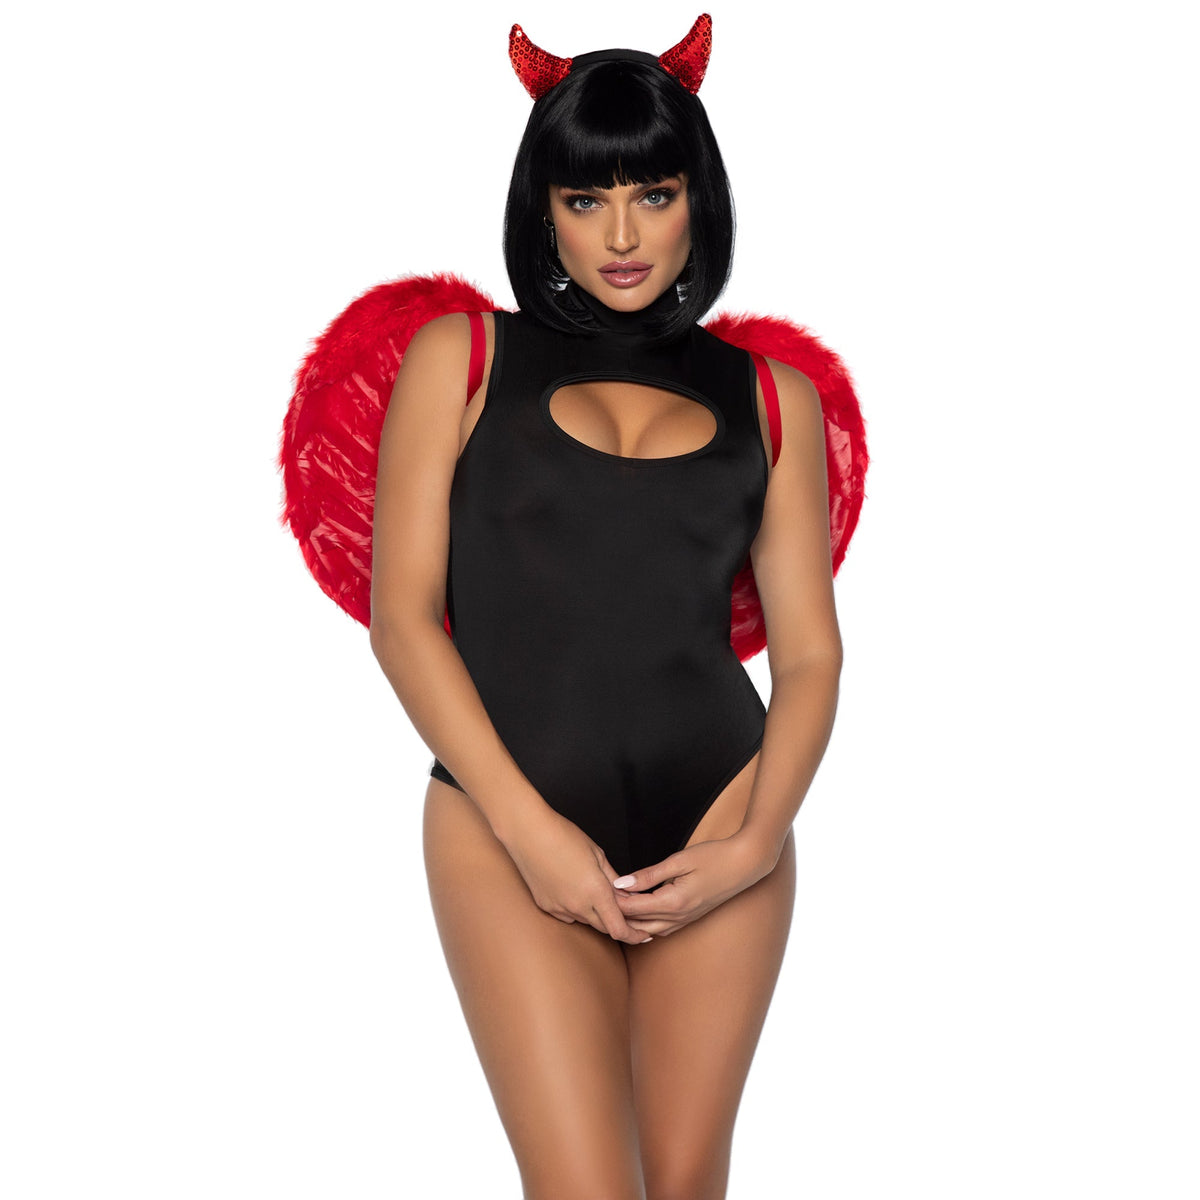 LEG AVENUE/SKU DISTRIBUTORS INC Costume Accessories Red Wings for Adults 714718550534